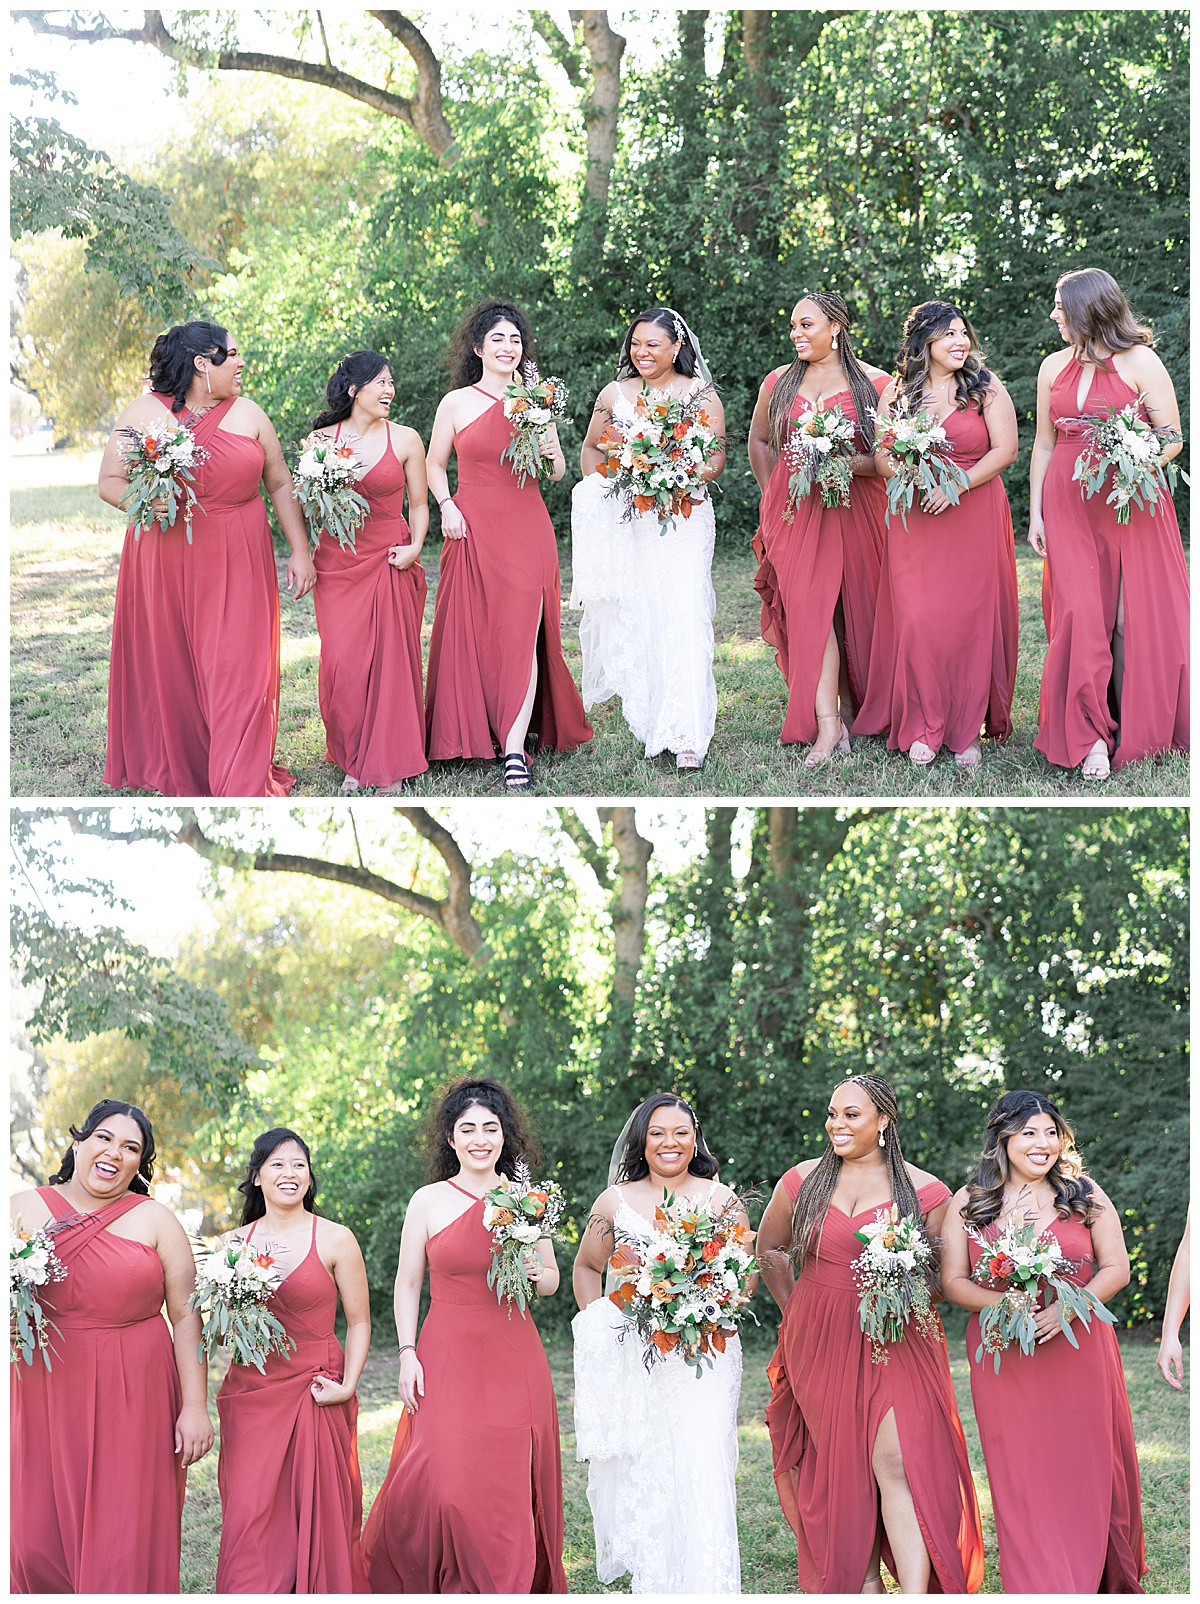 Bridal party smile and laugh together at The Bowery House & Gardens